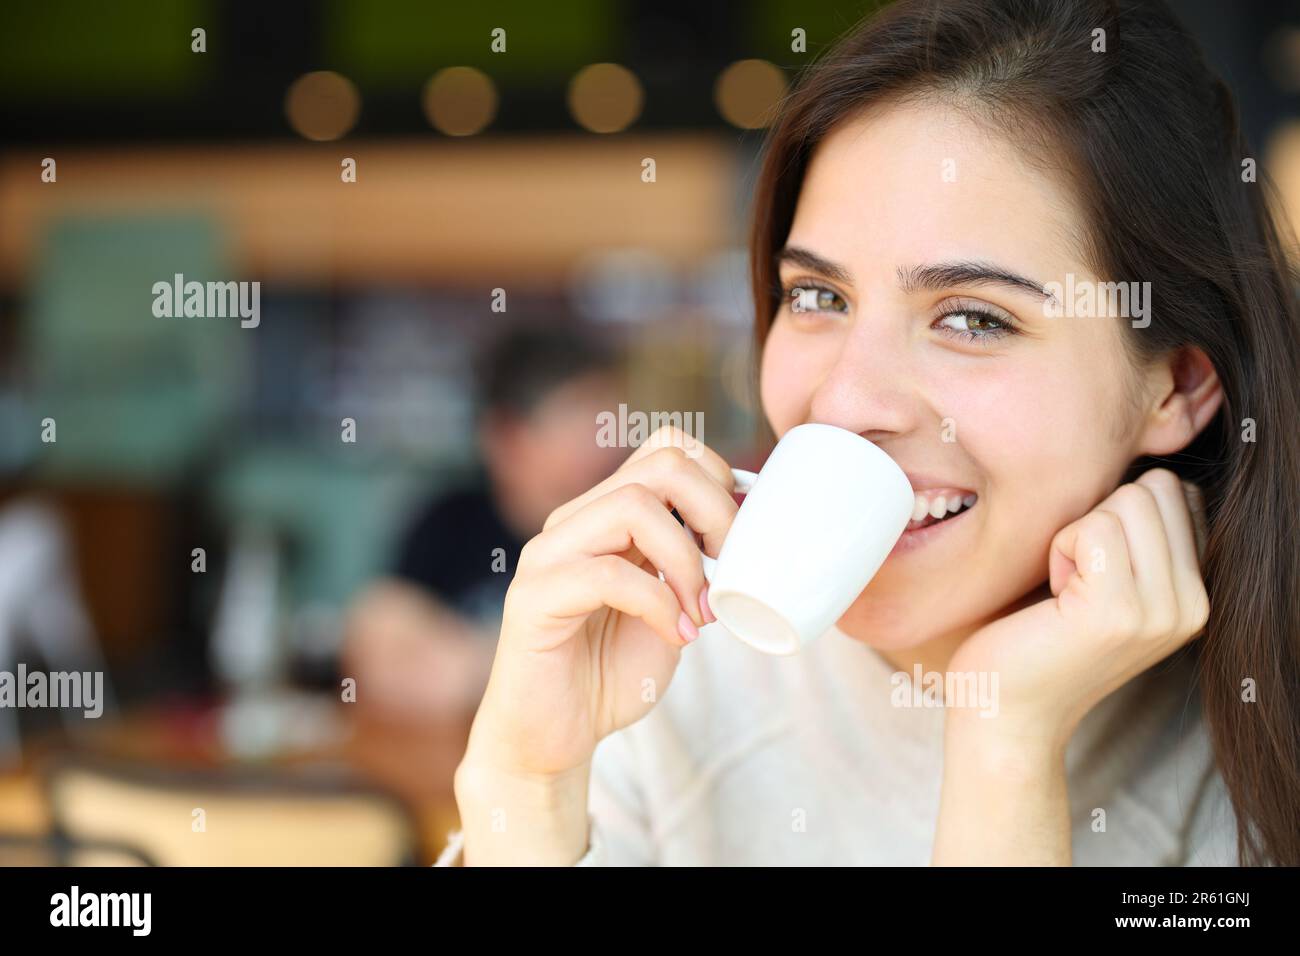 Happy woman drinking coffee in a bar looks at you smiling Stock Photo